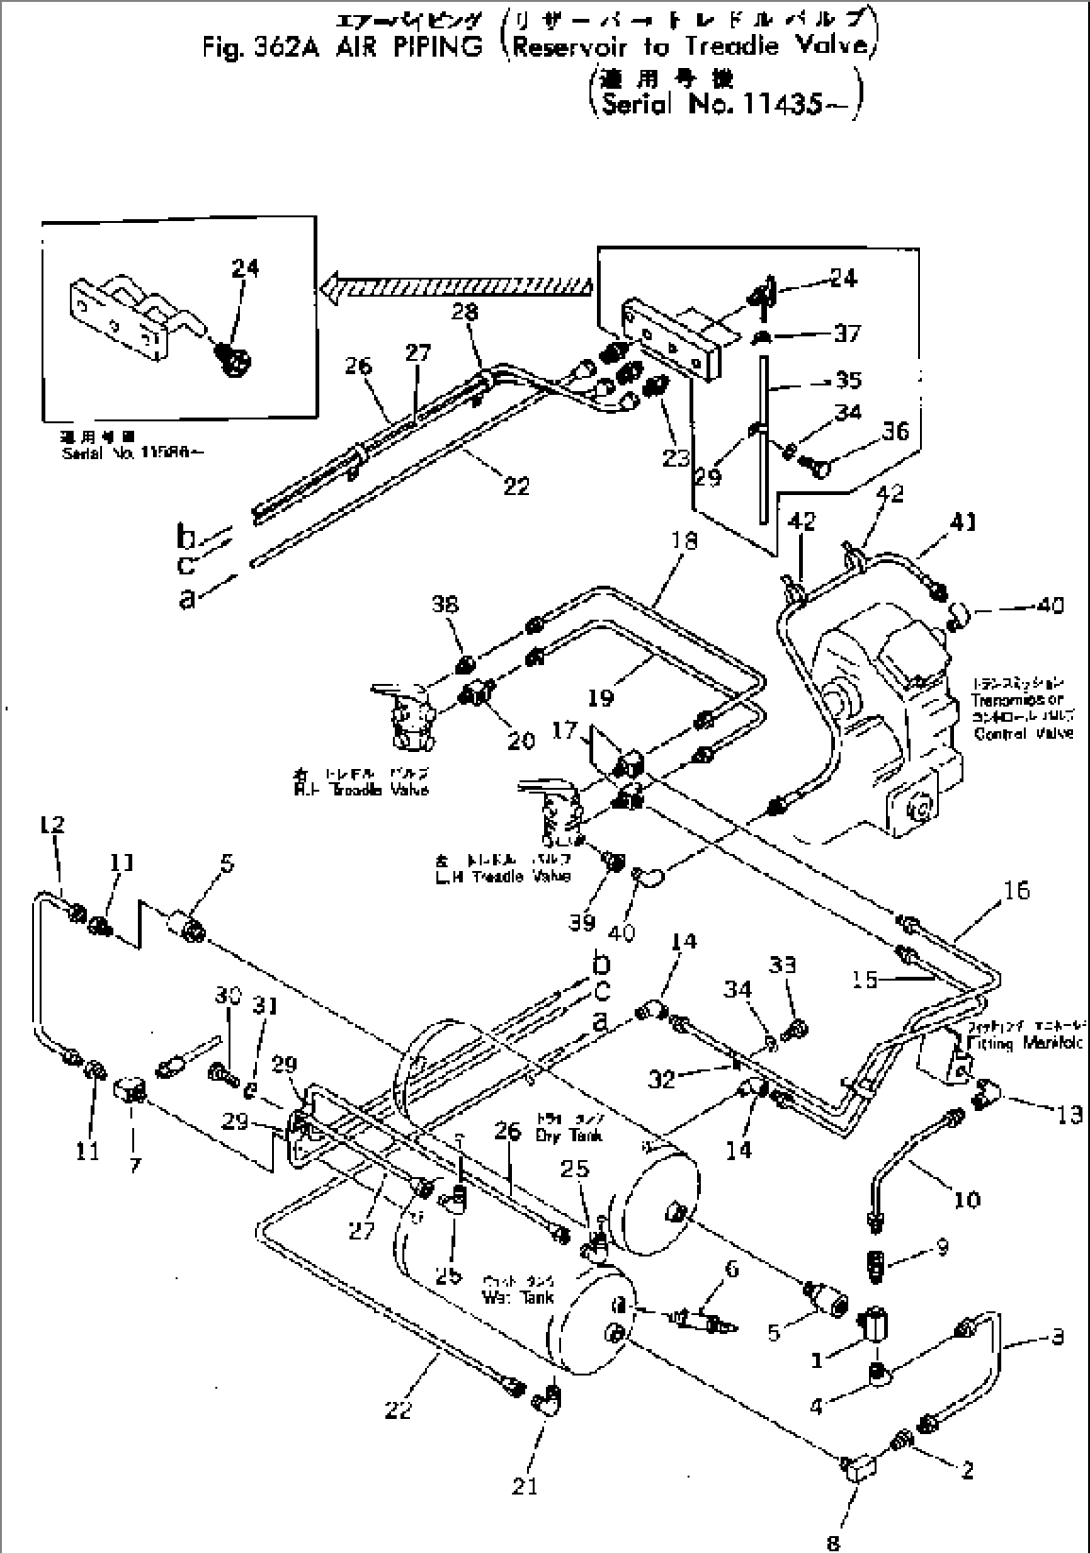 AIR PIPING (RESERVOIR TO TREADLE VALVE)(#11435-)